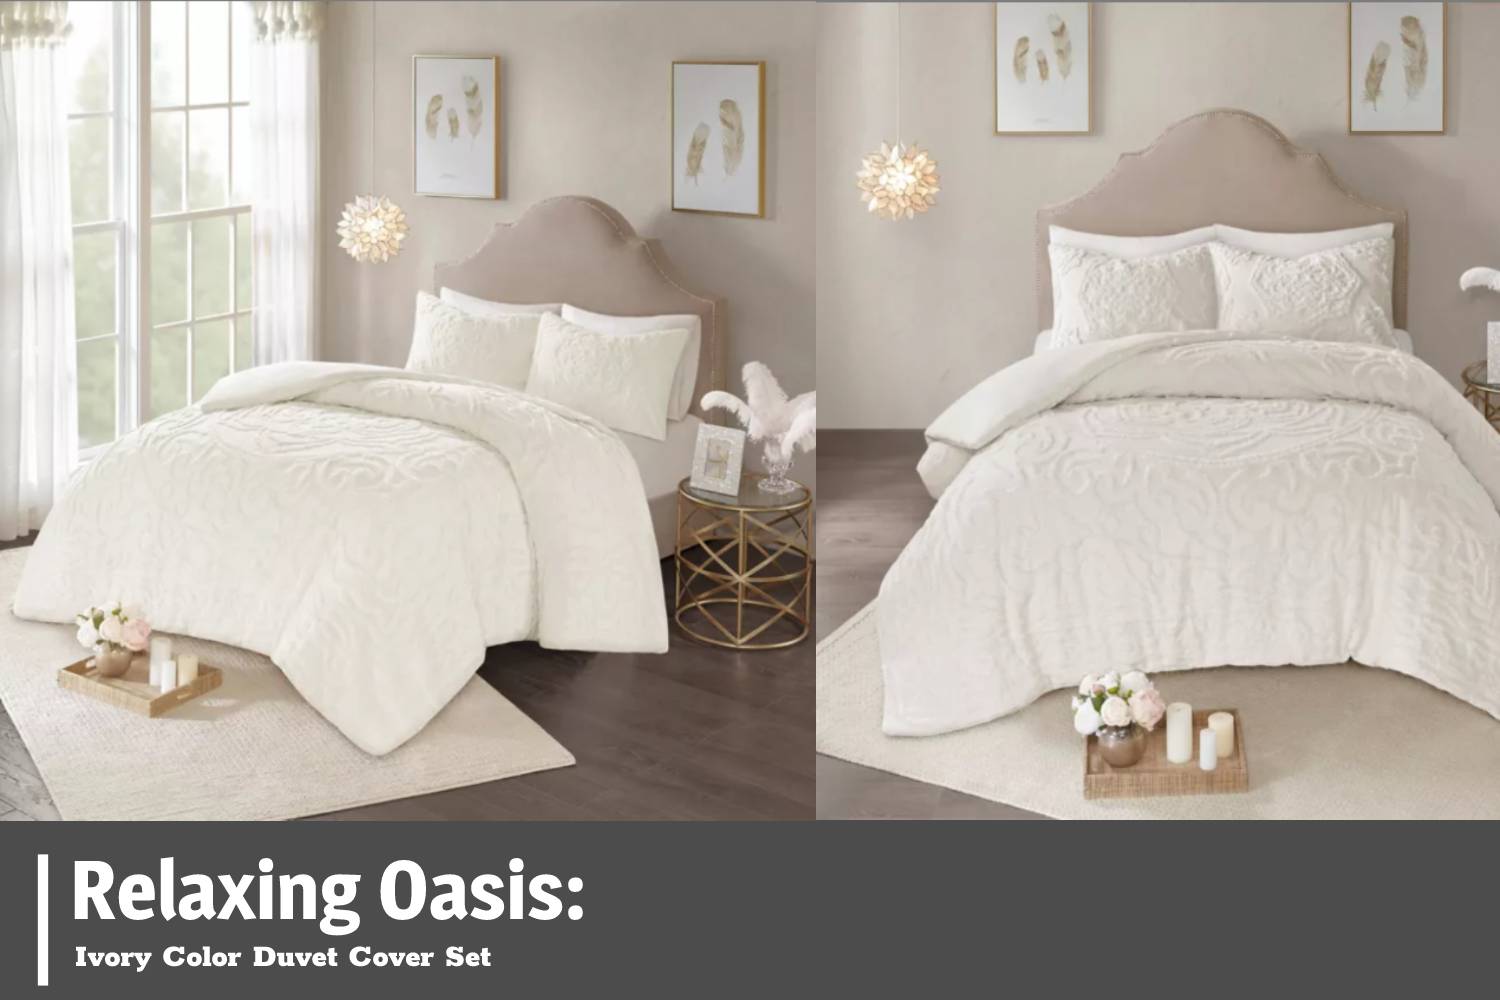 Relaxing oasis: Ivory color duvet cover set